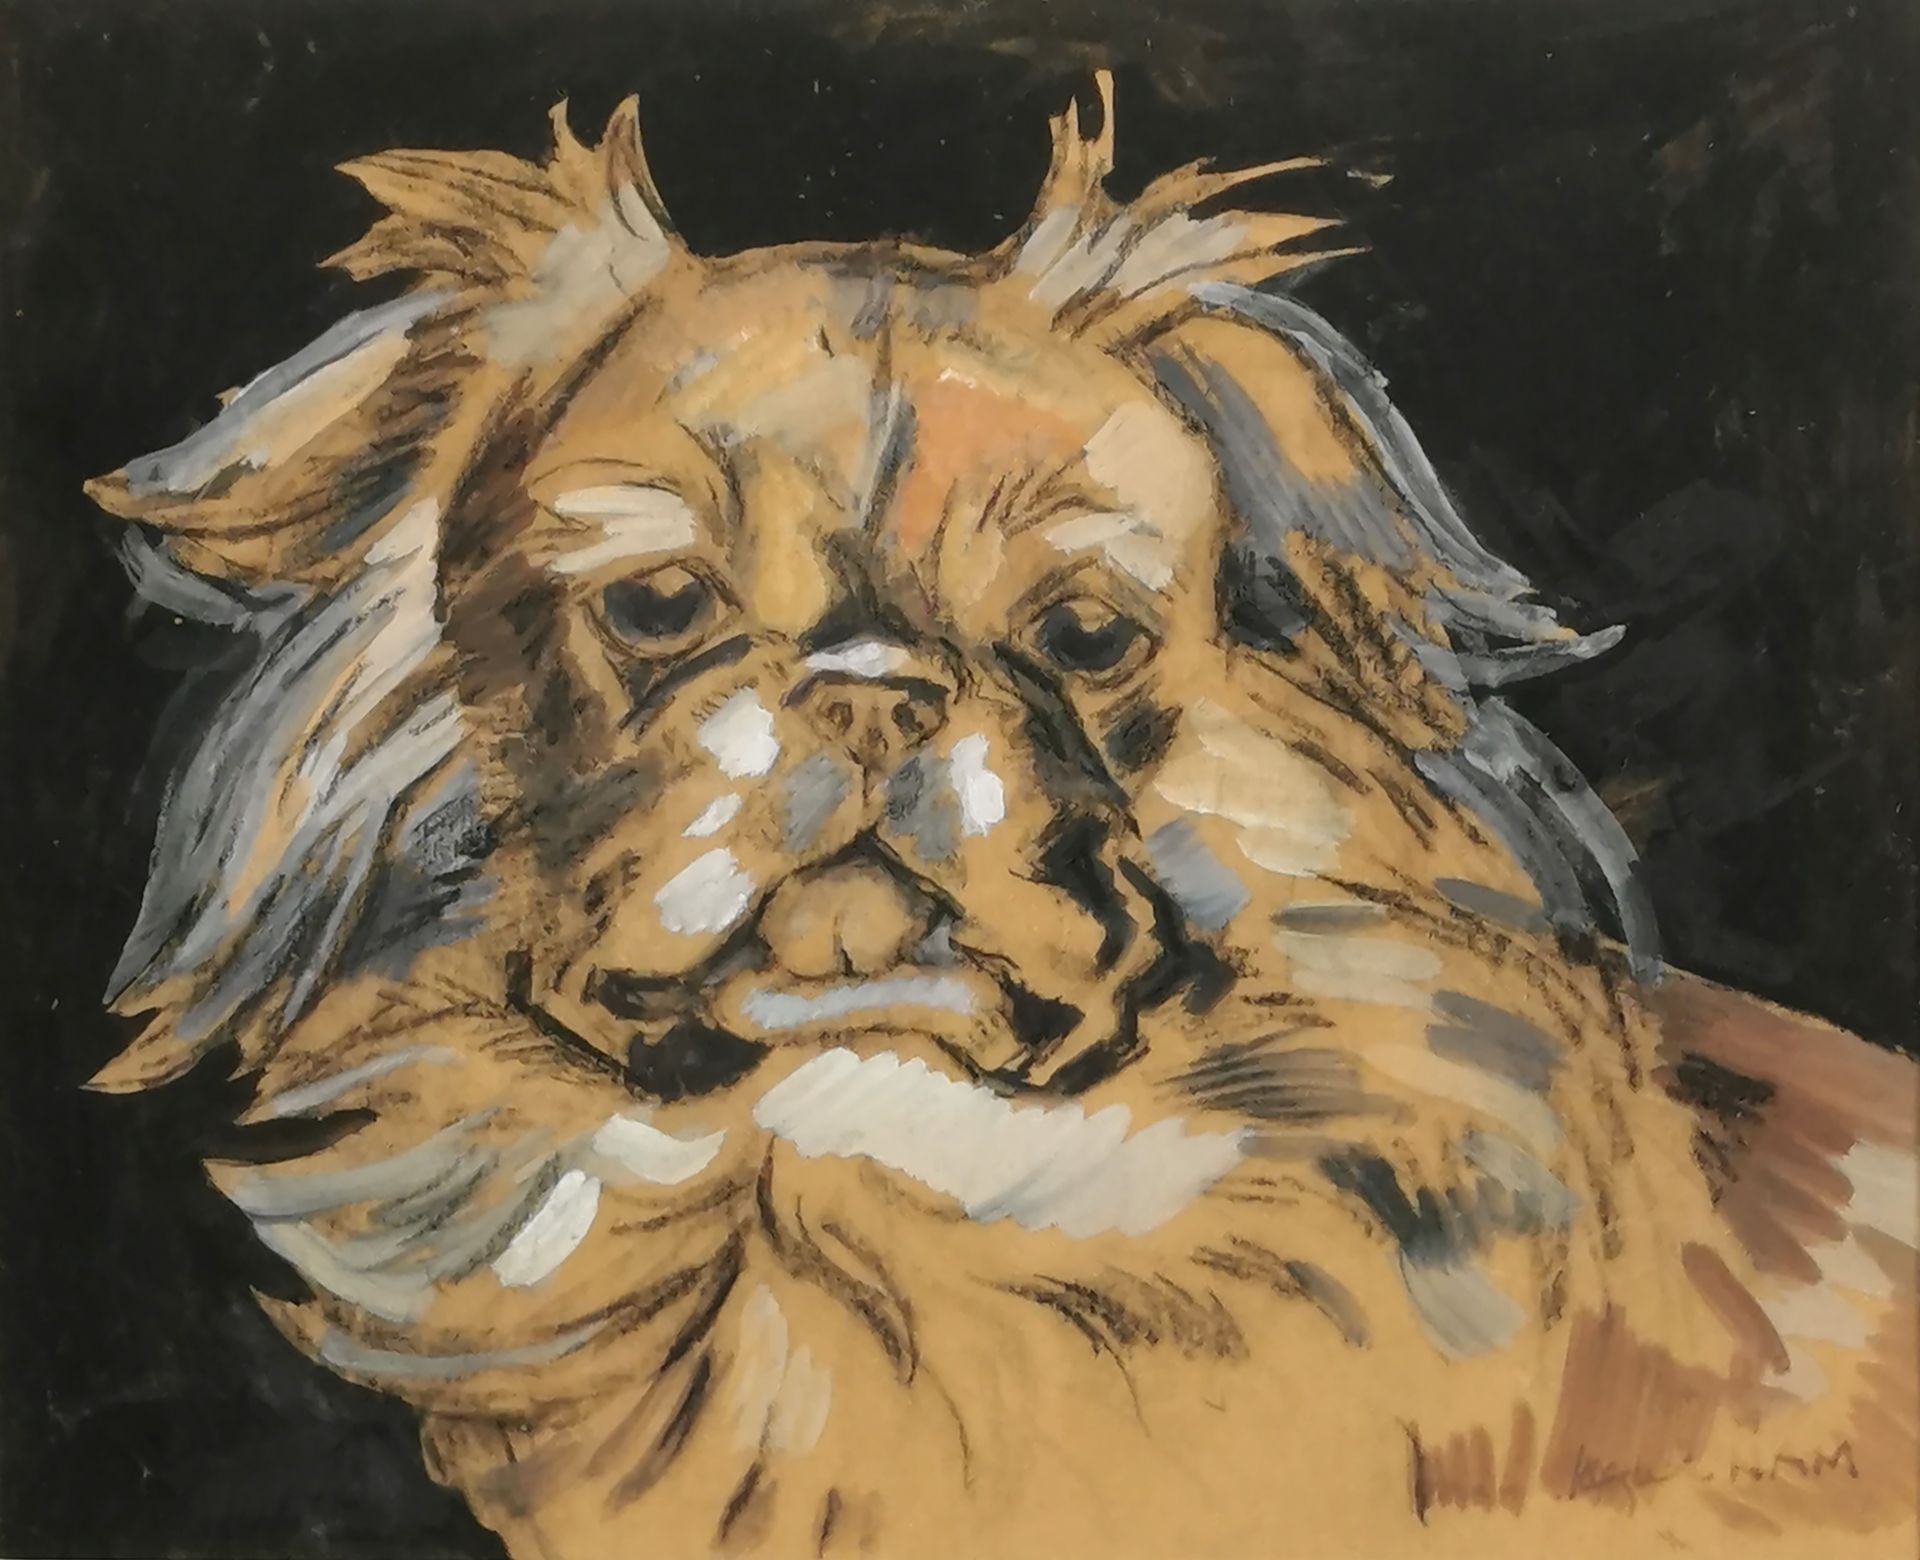 Null Jacques NAM, Jacques LEHMANN said (1881-1974)

Study of a dog's head

Charc&hellip;